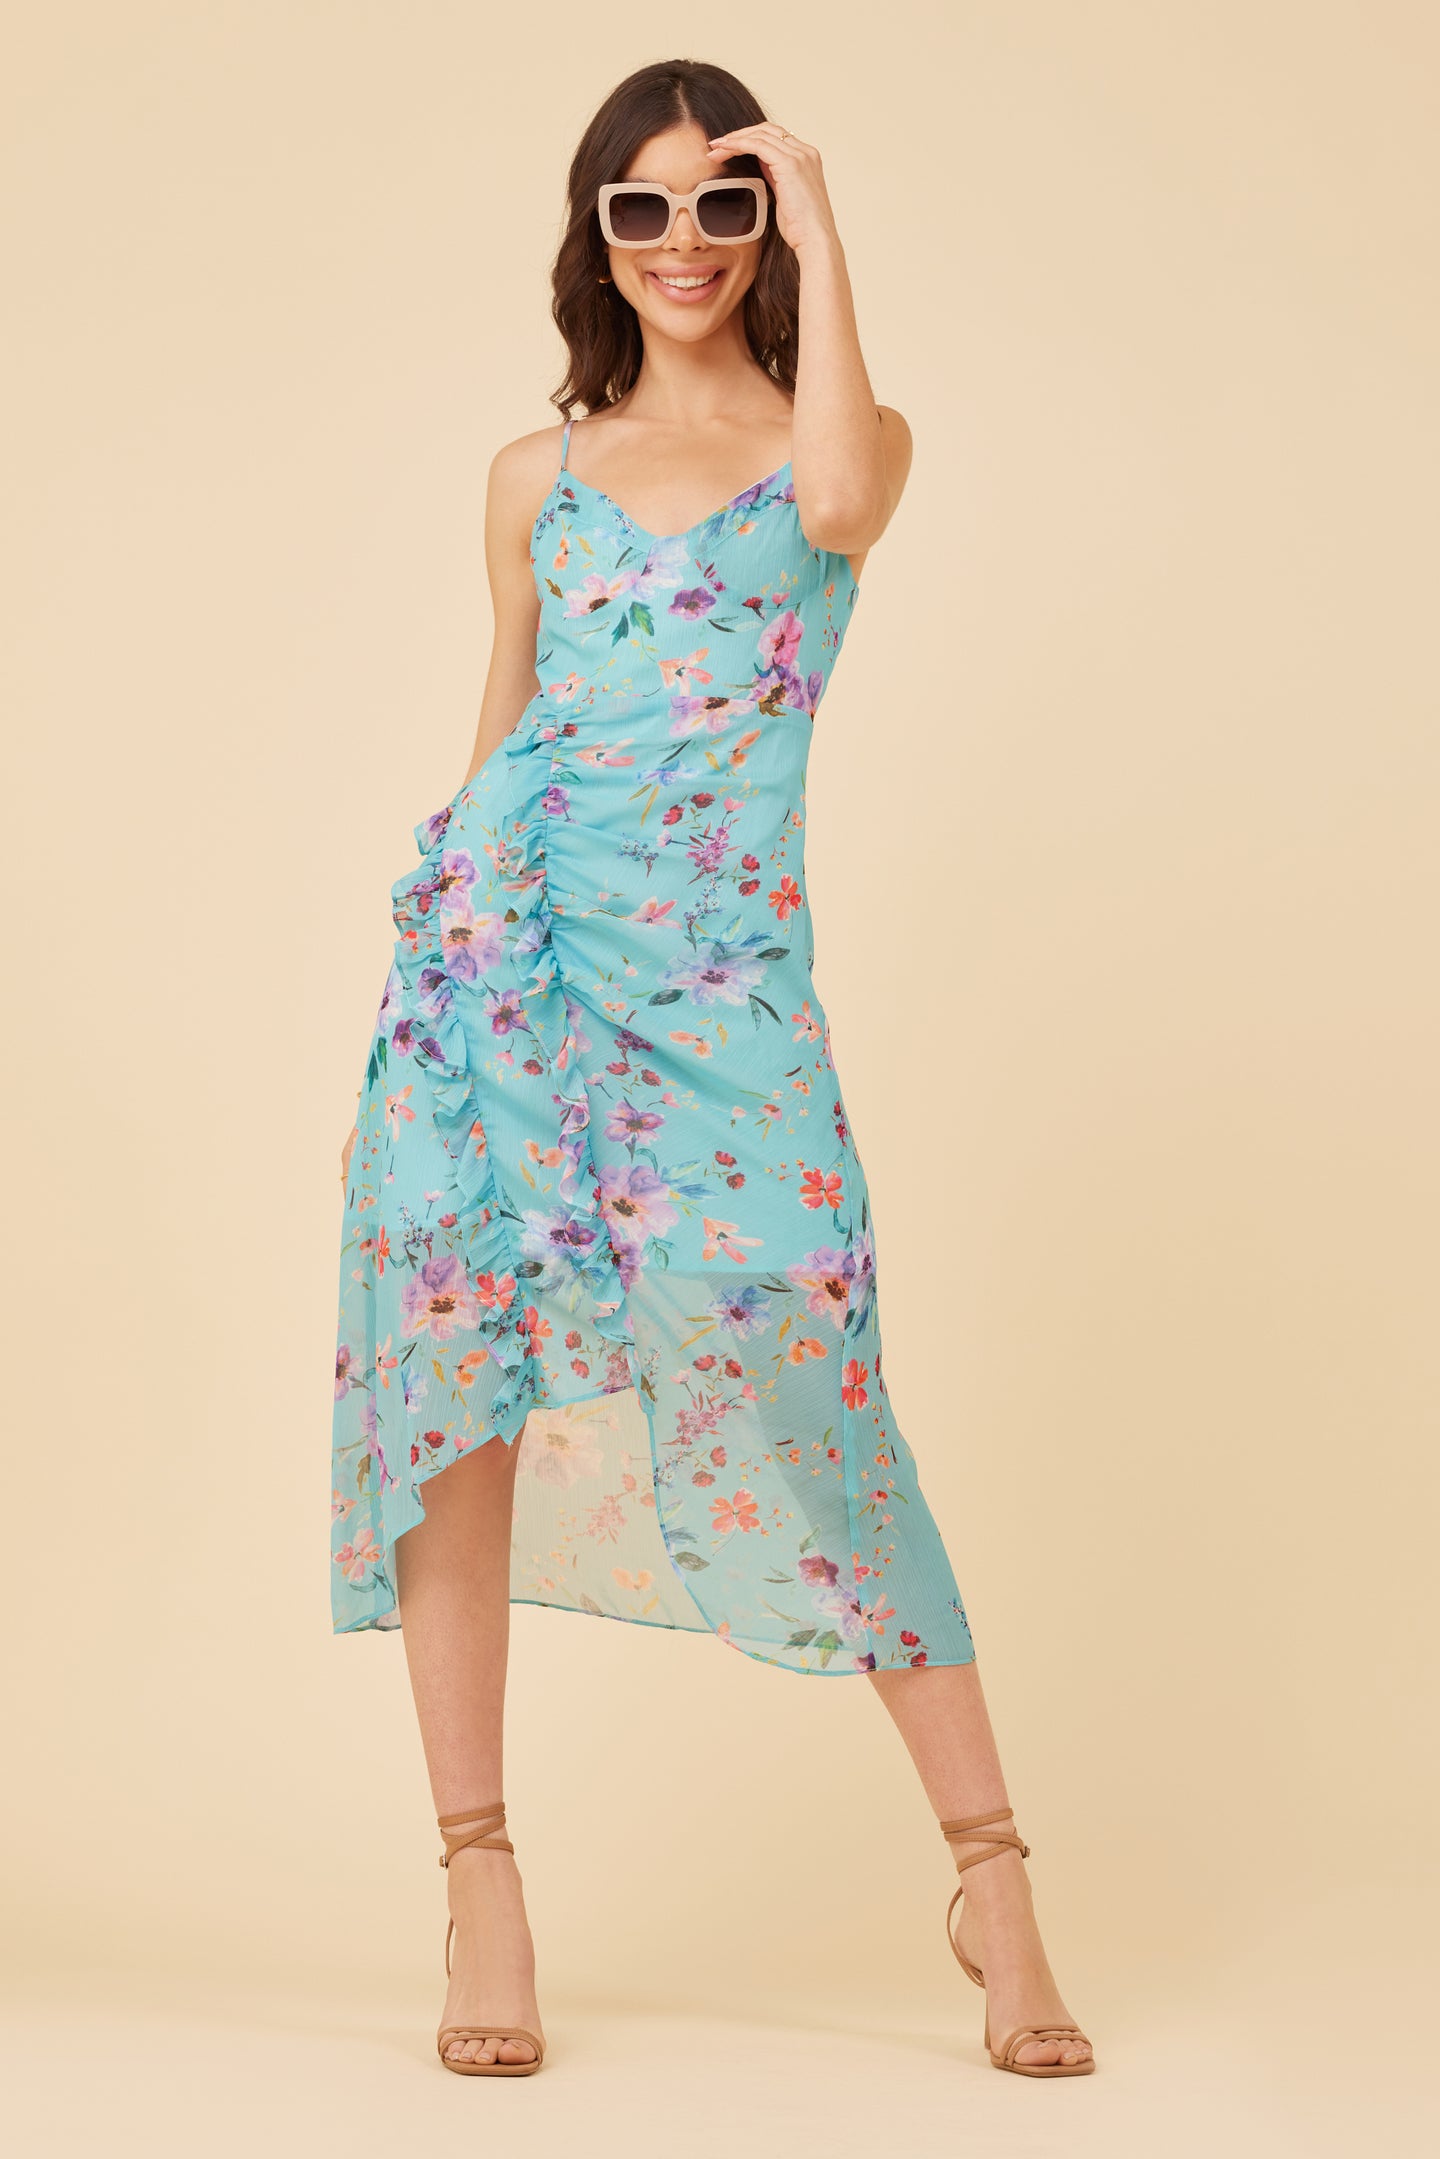 Clementine Dress, Turquoise Sea Floral